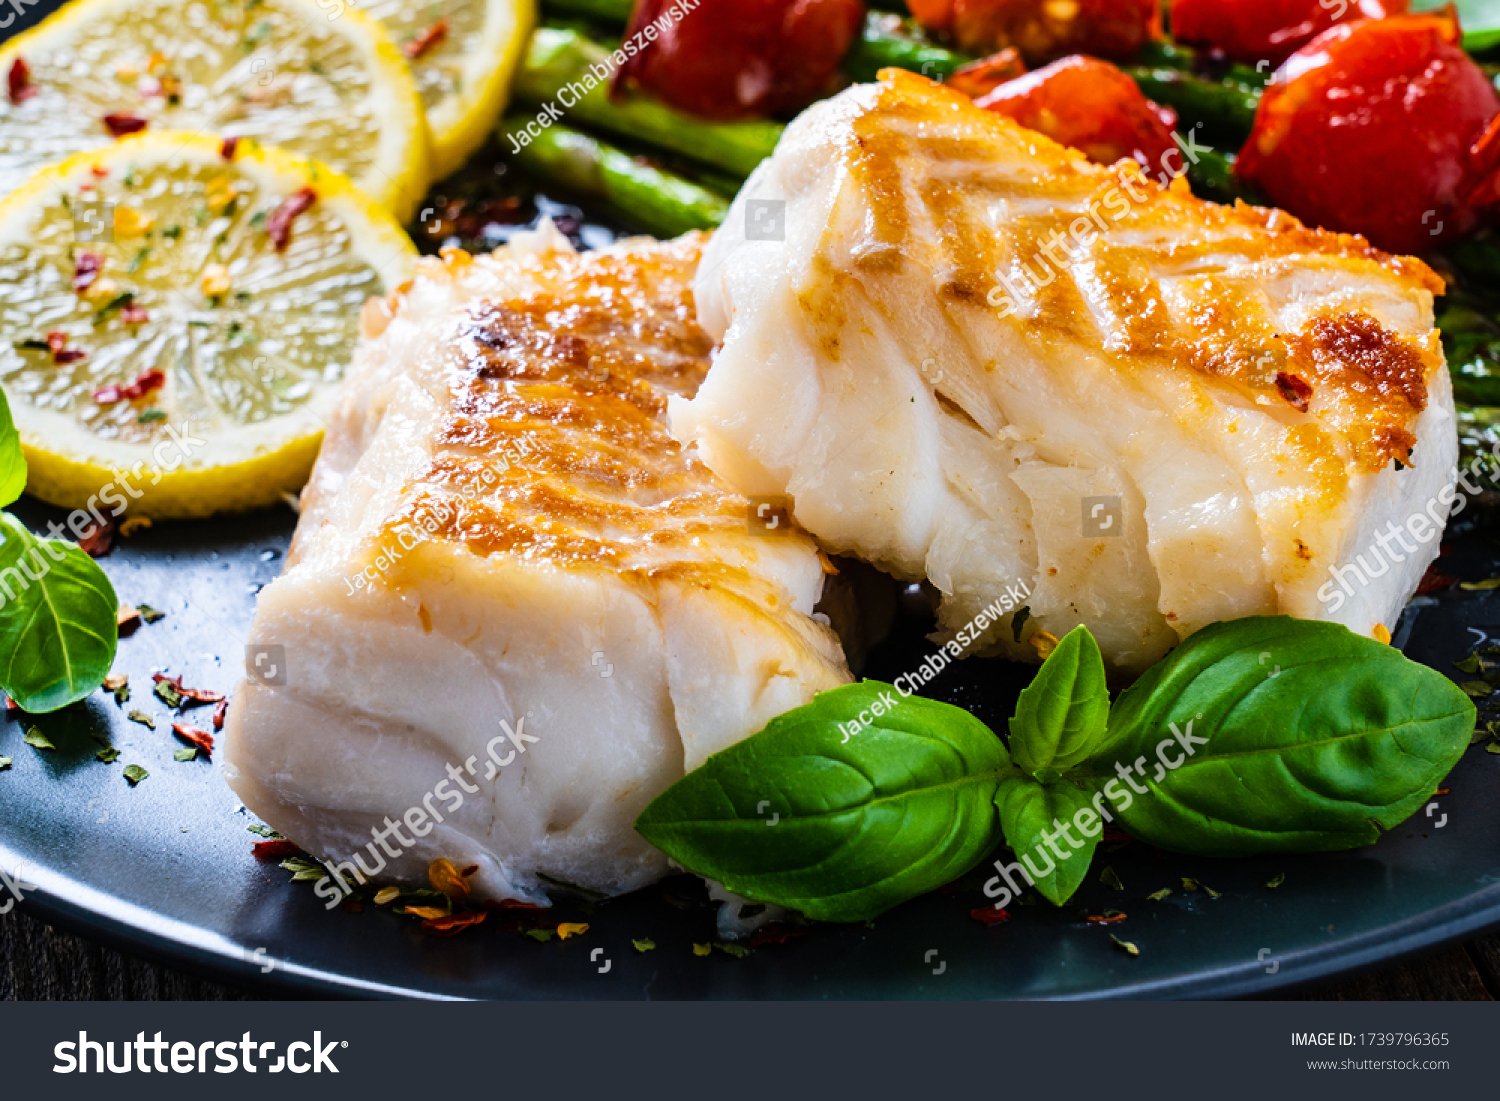 Fish dish - fried cod fillet with asparagus on wooden table  #1739796365